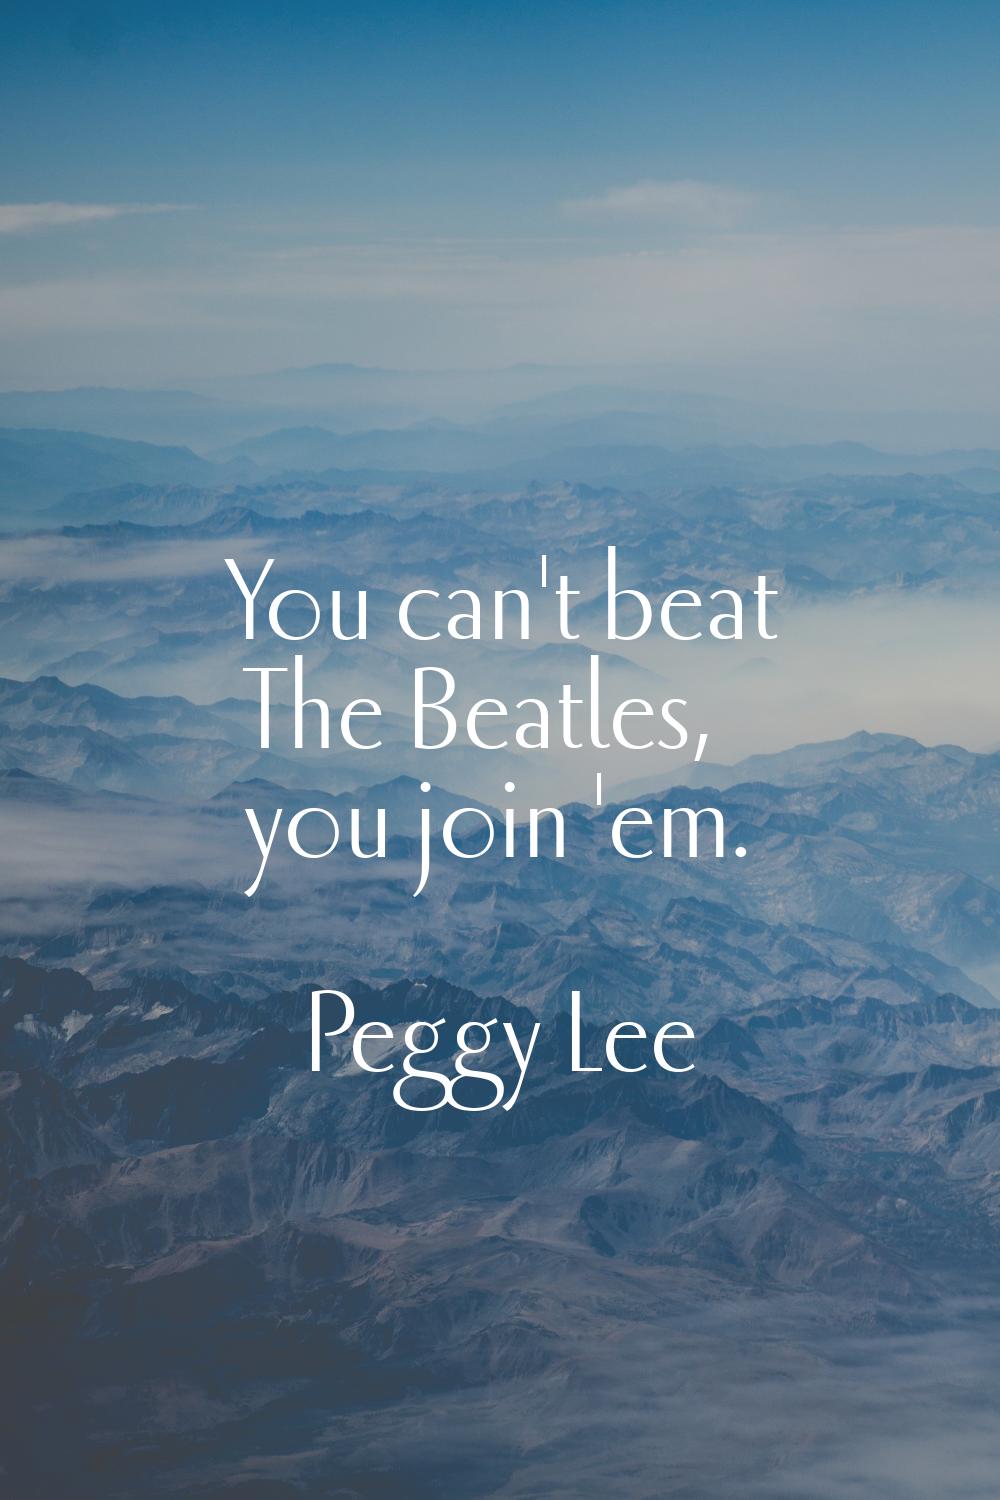 You can't beat The Beatles, you join 'em.